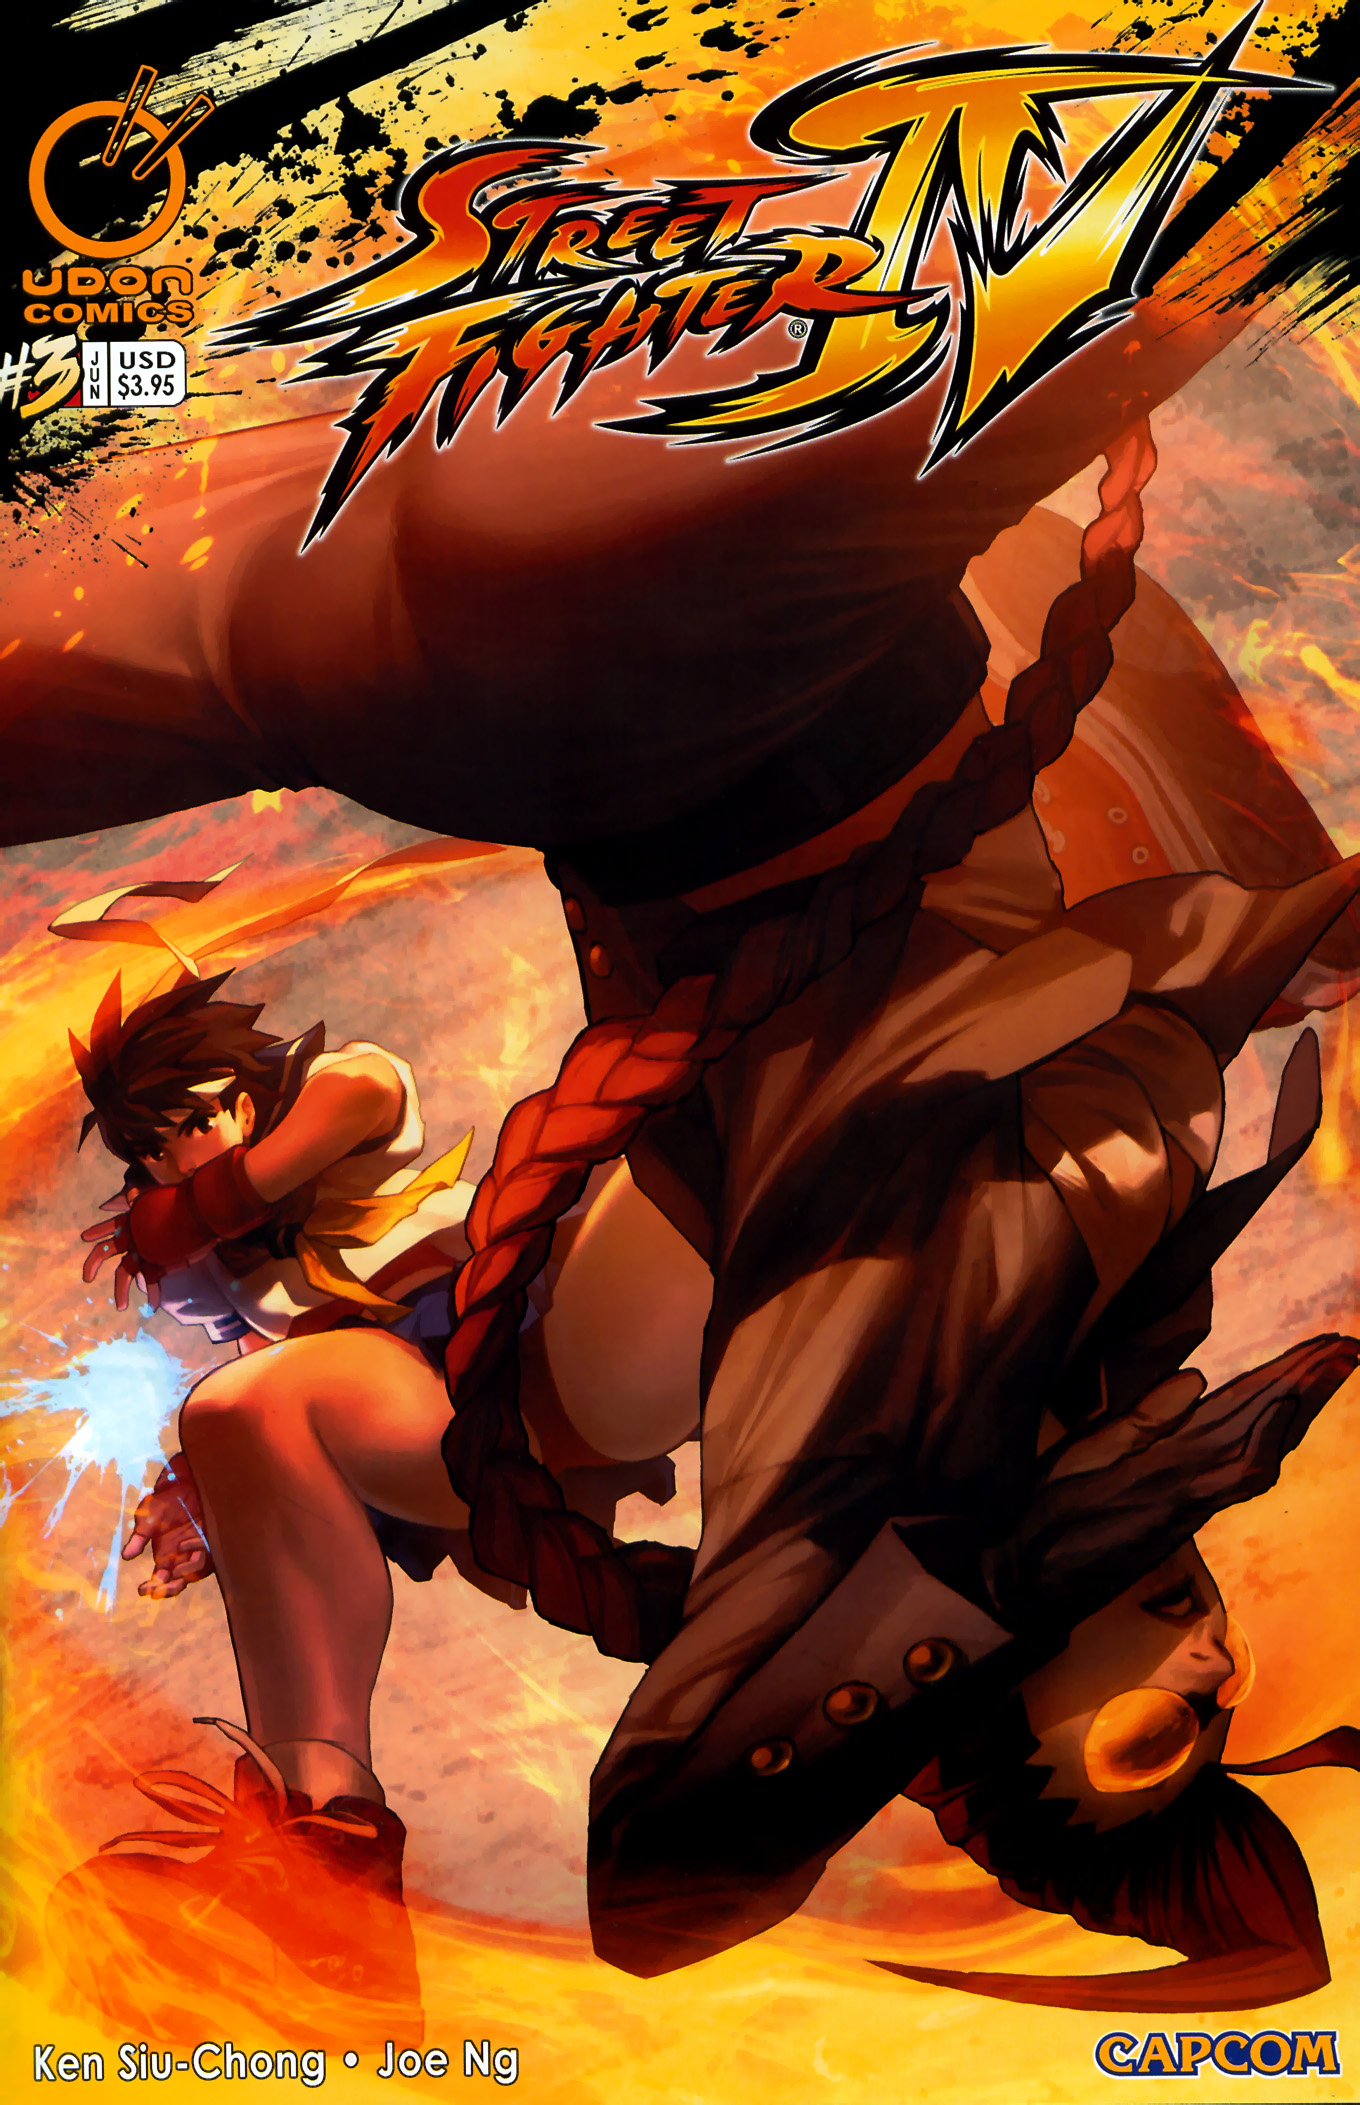 Read online Street Fighter IV comic -  Issue #3 - 1